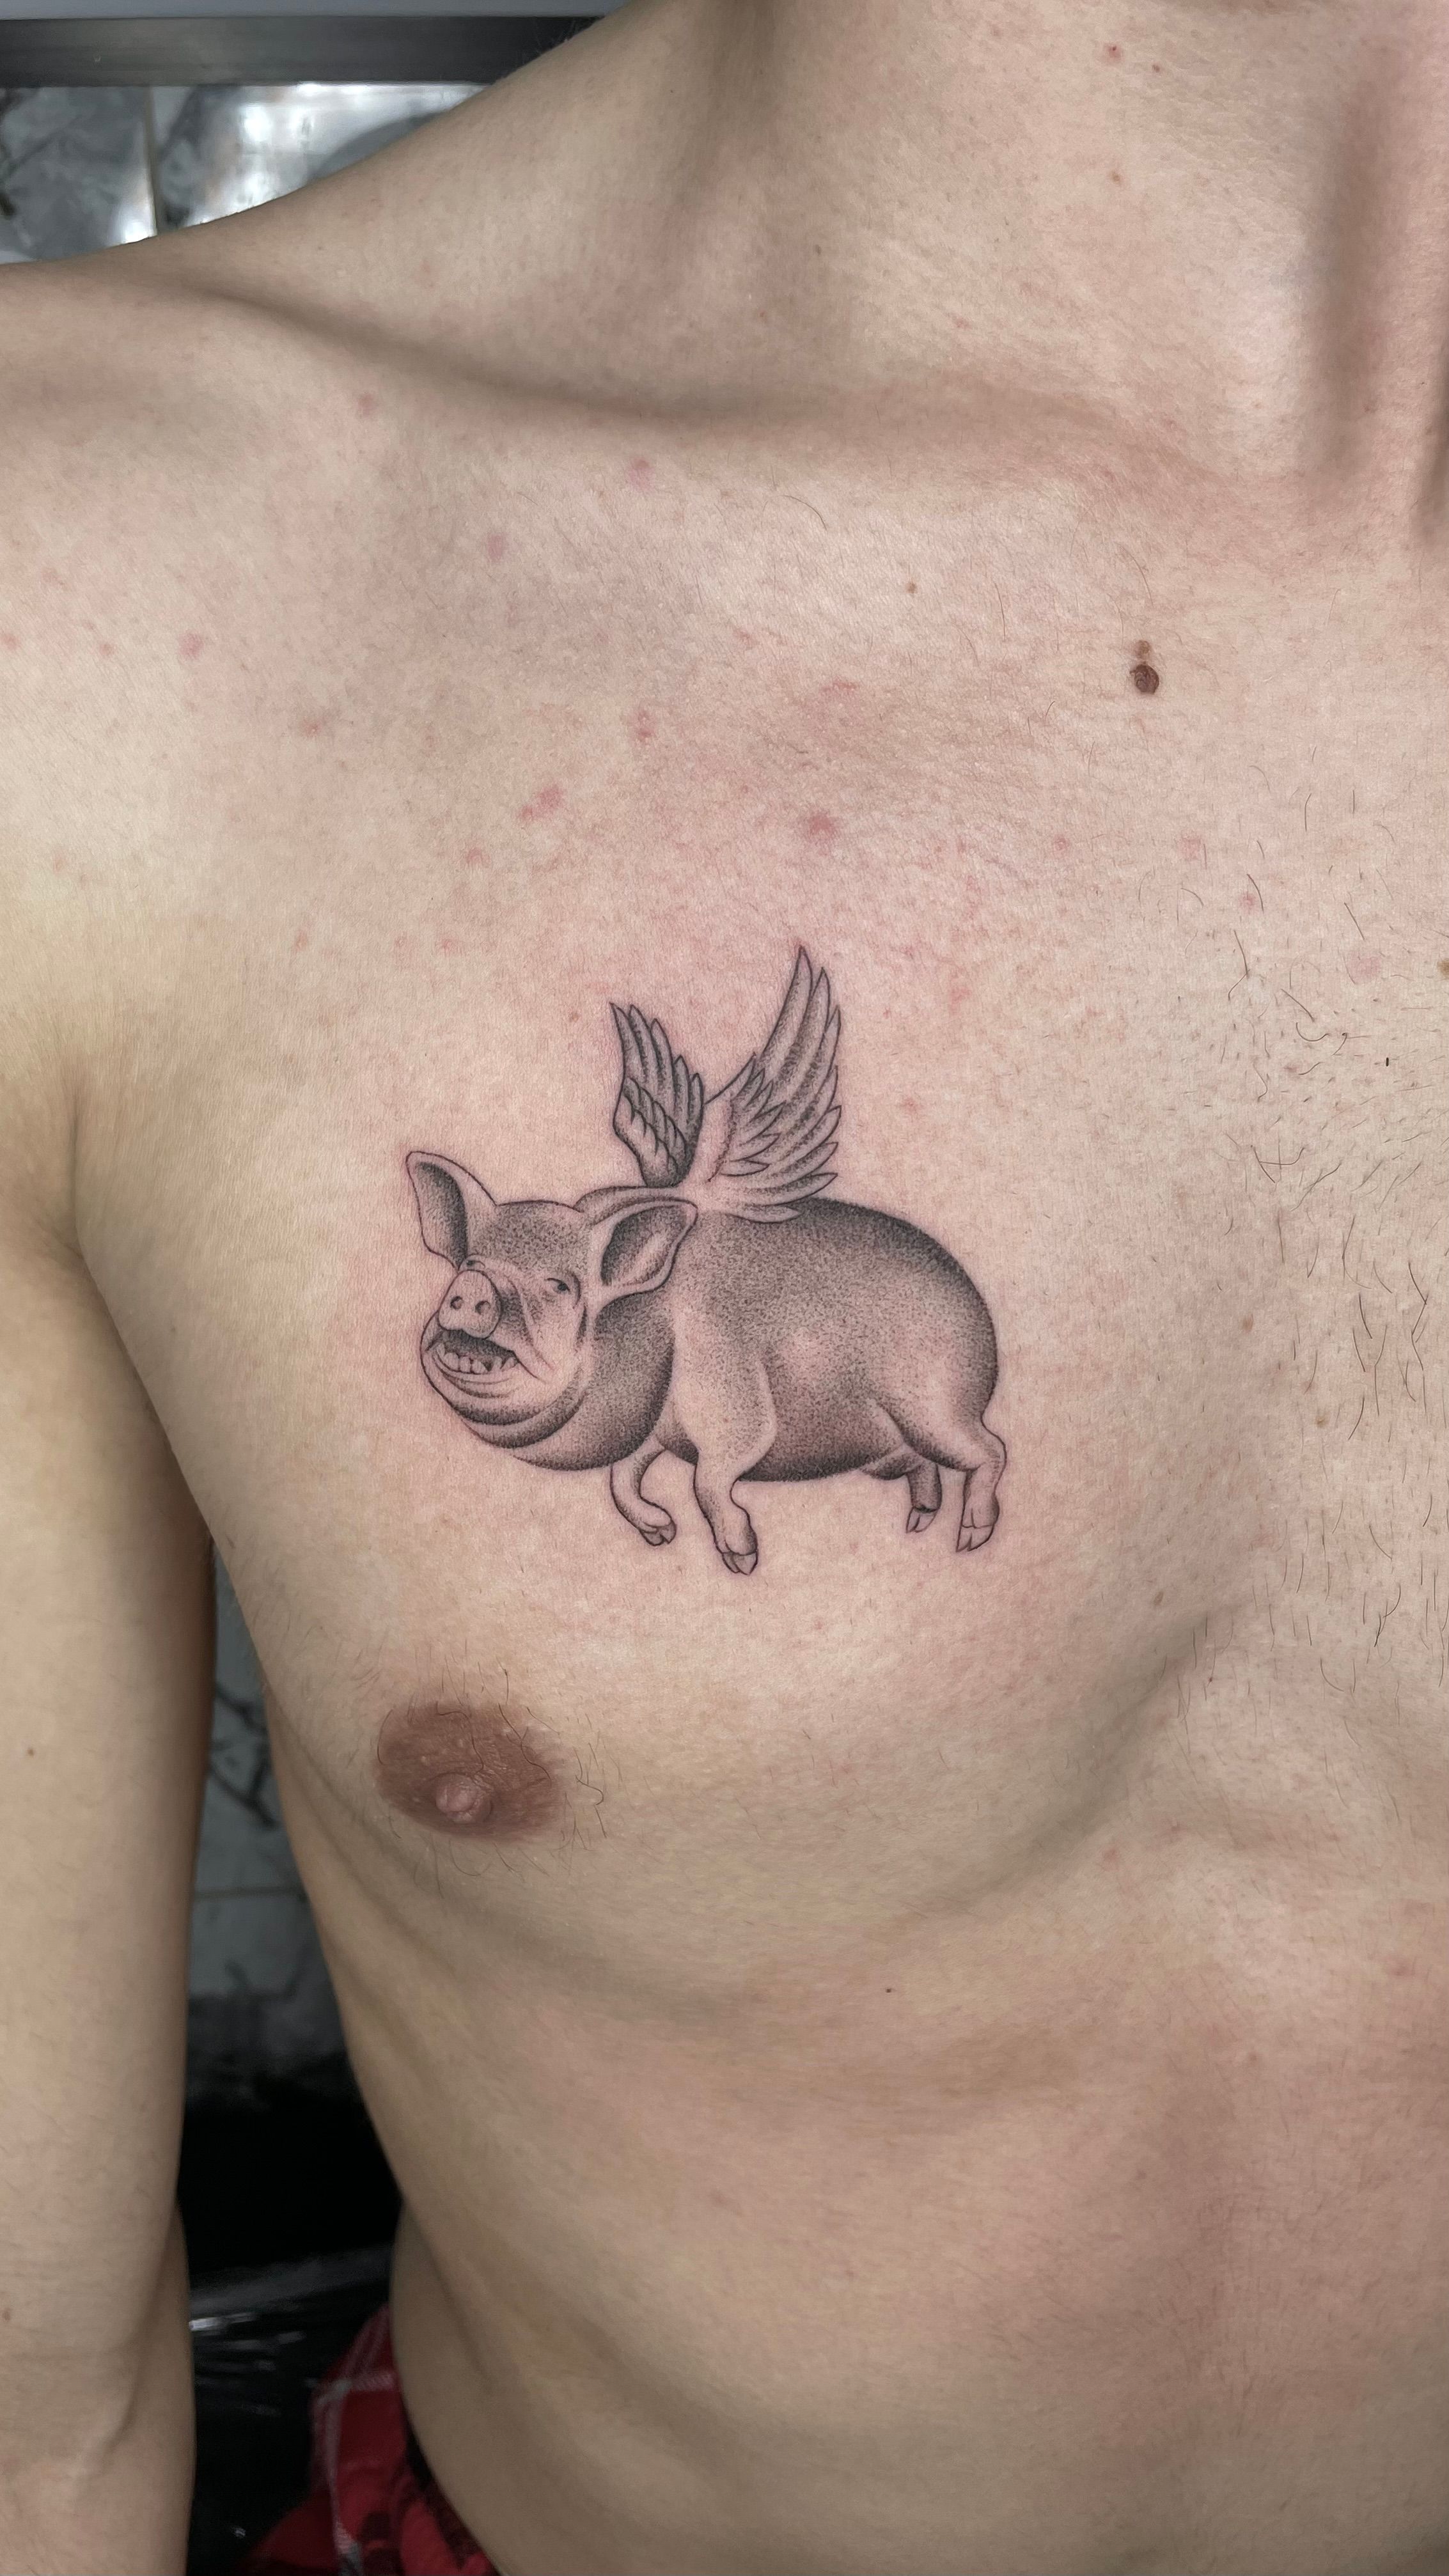 Wim Delvoye: Tattooing Pigs For The Art Of Provocation